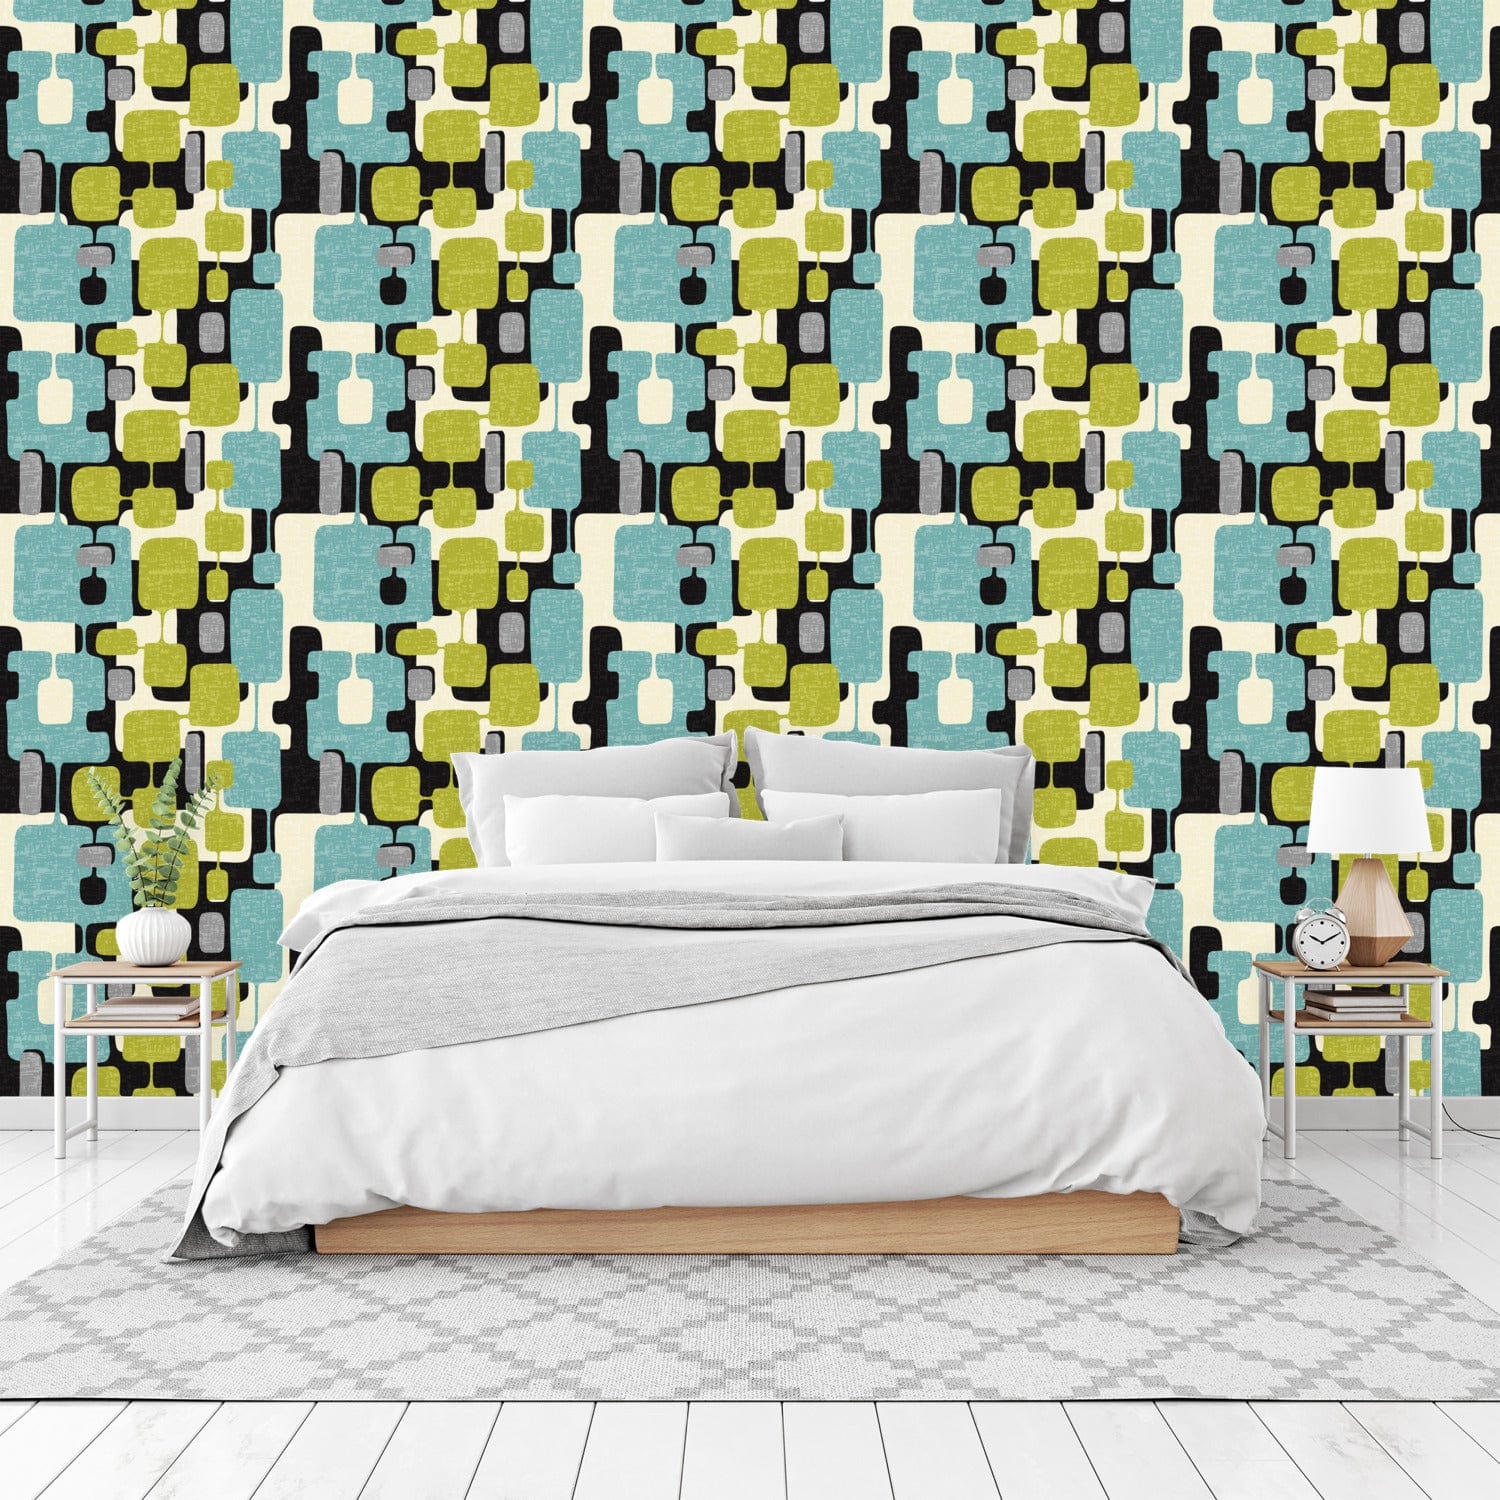 kate-mcenroe-nyc Mid Century Modern Abstract Peel and Stick Wallpaper Panels in Retro Teal, Lime Green, Gray, and Cream Hues Wallpaper Sample H12 x W20" 75643